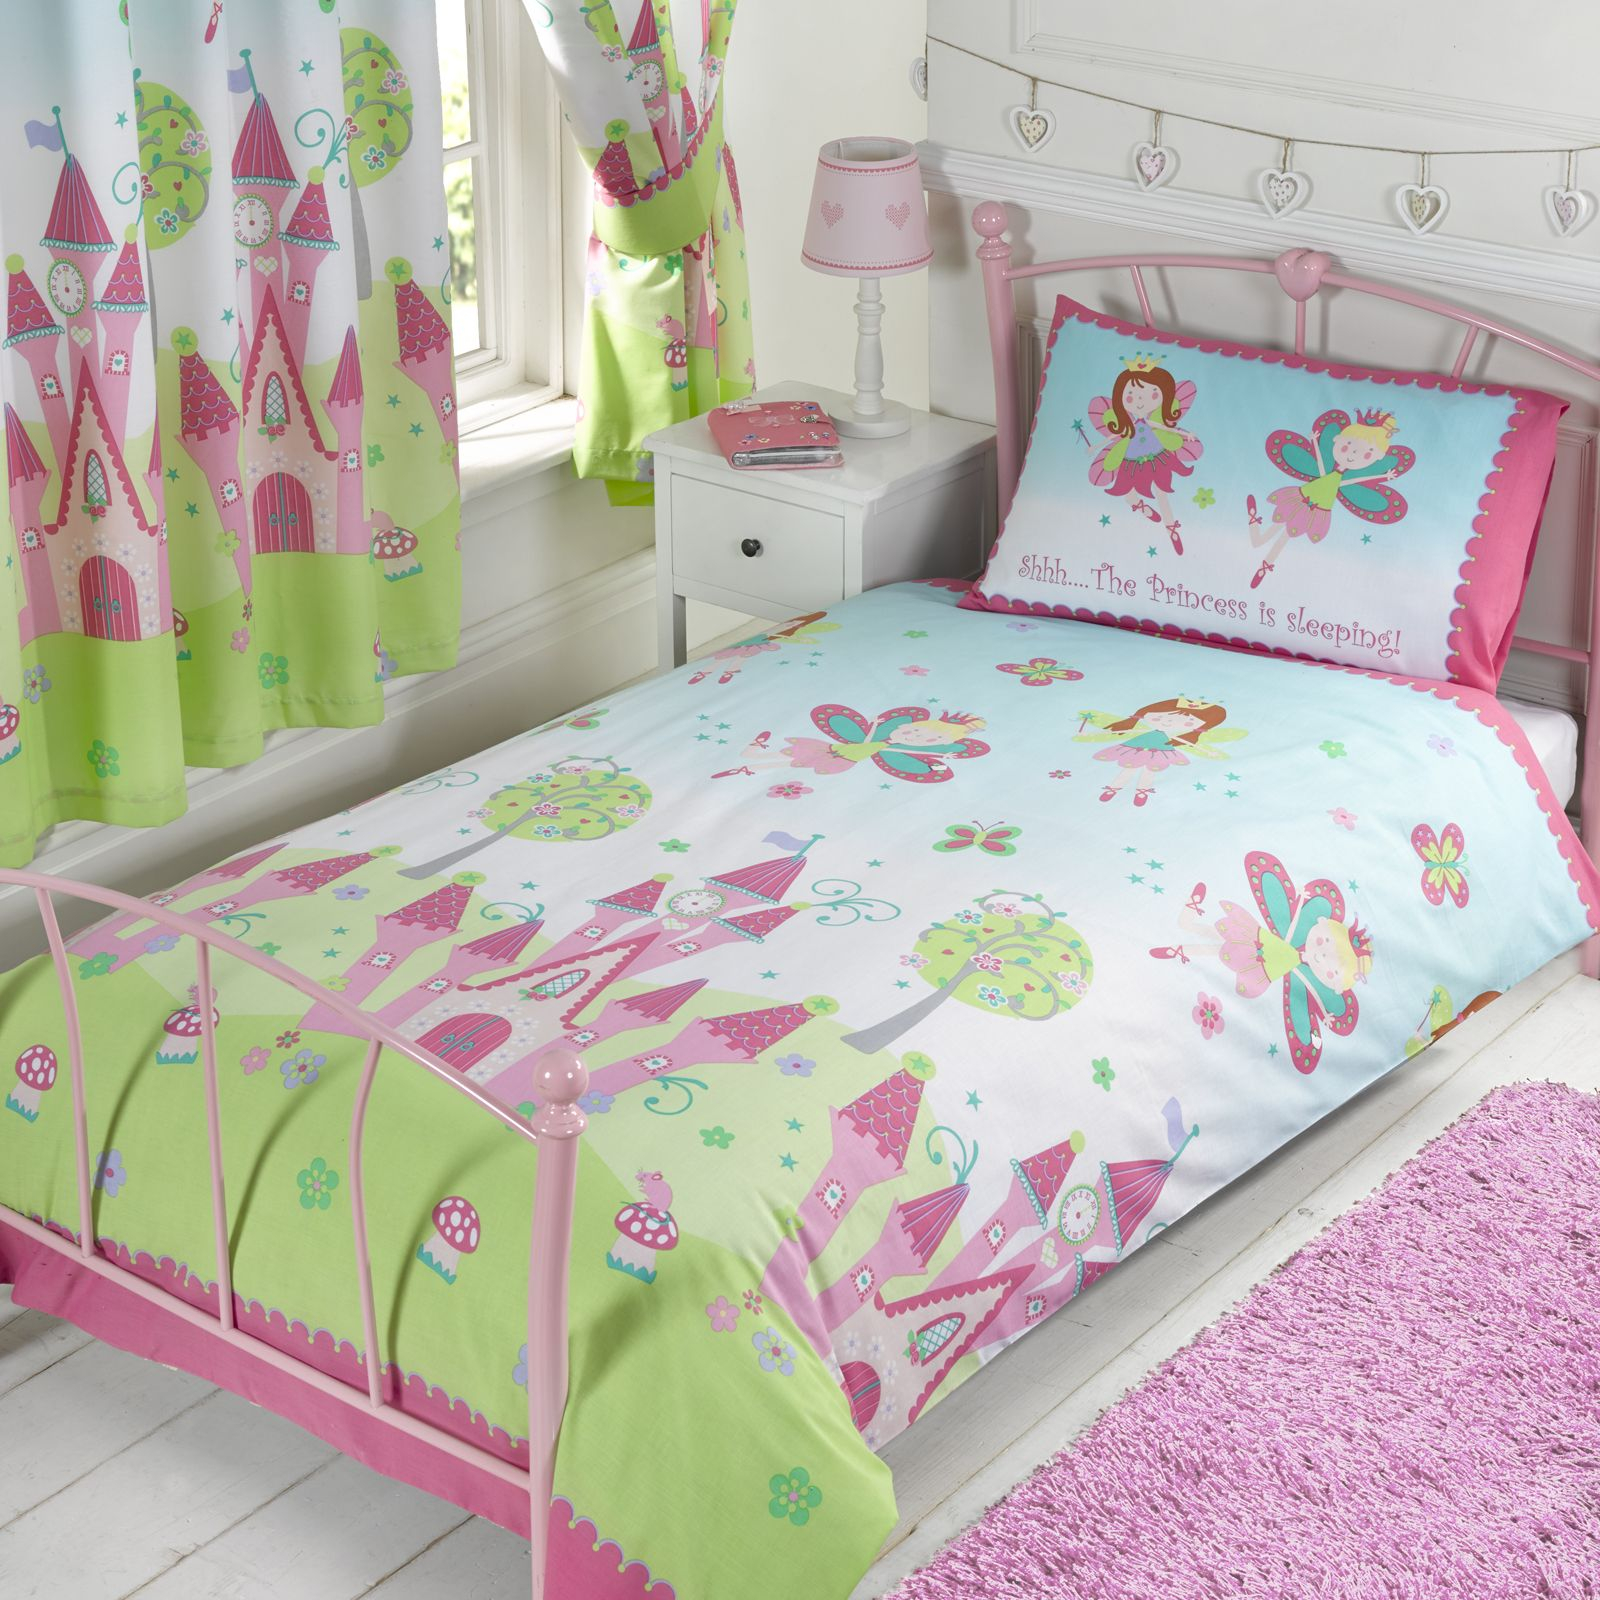 Details About Princess Is Sleeping Bedroom Bedding And Curtains Available Single Double regarding sizing 1600 X 1600